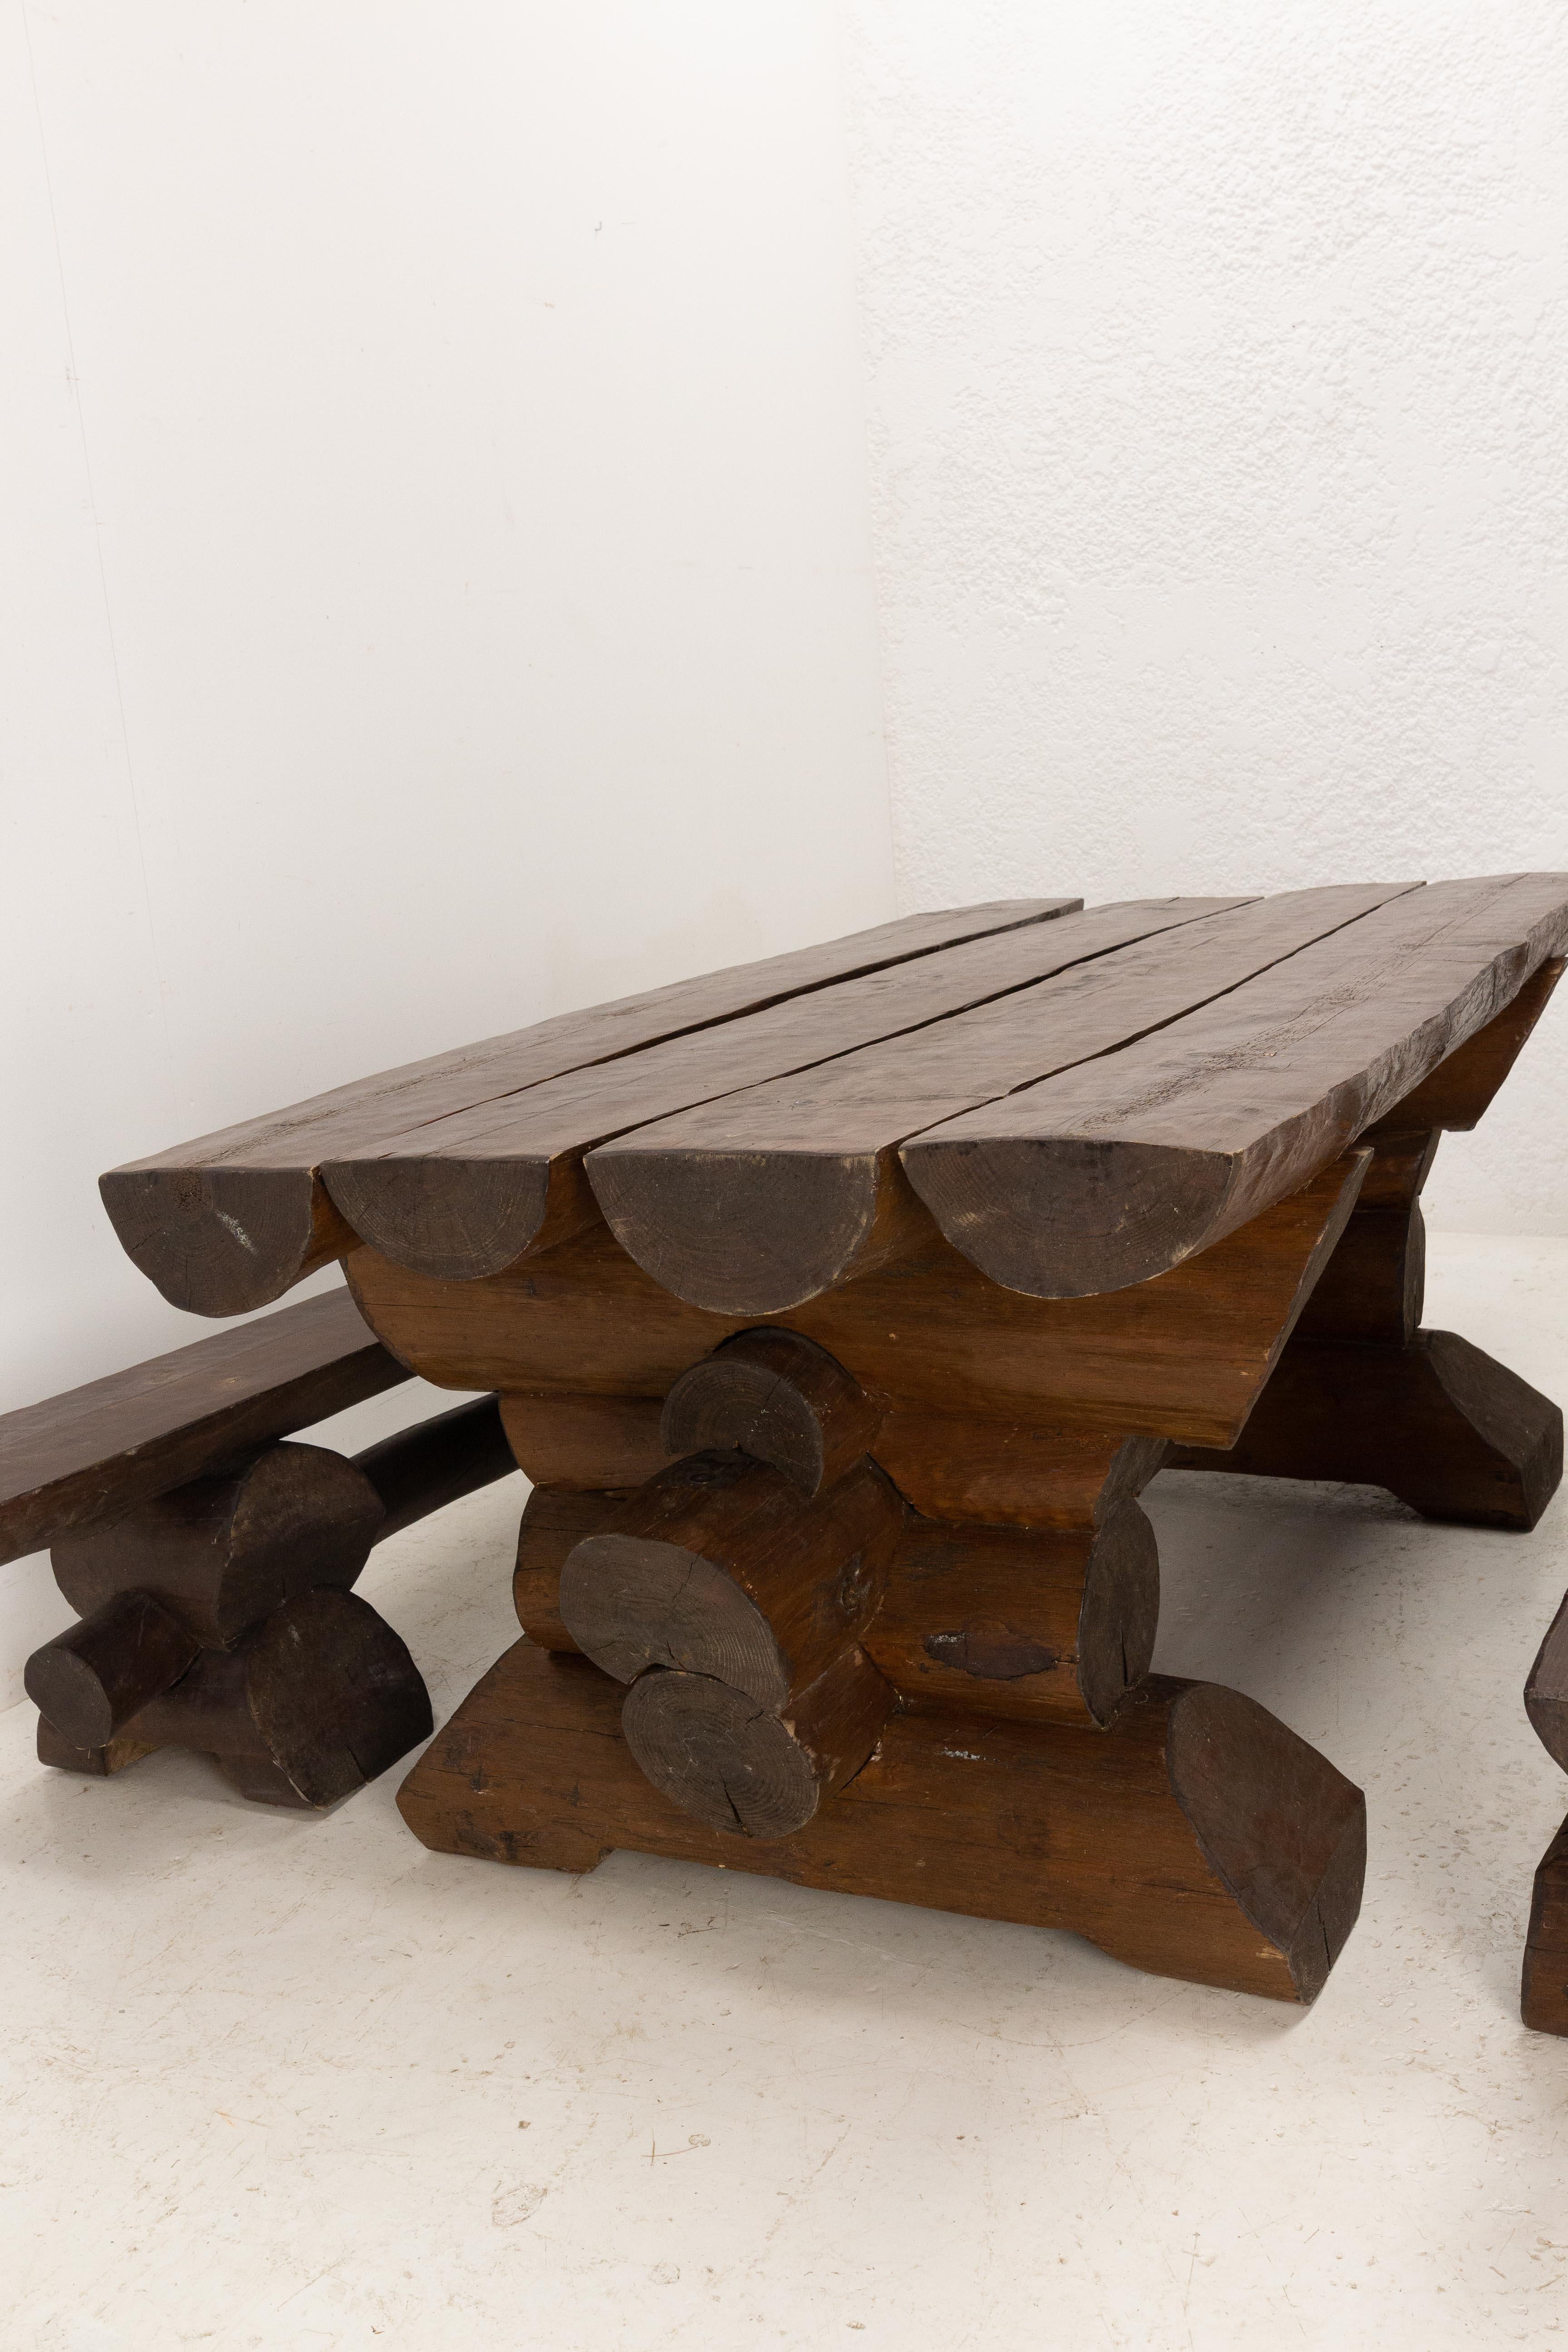 Pine Set of French Dining Table with Benches Brutalist or Swiss Alp Style, 2000